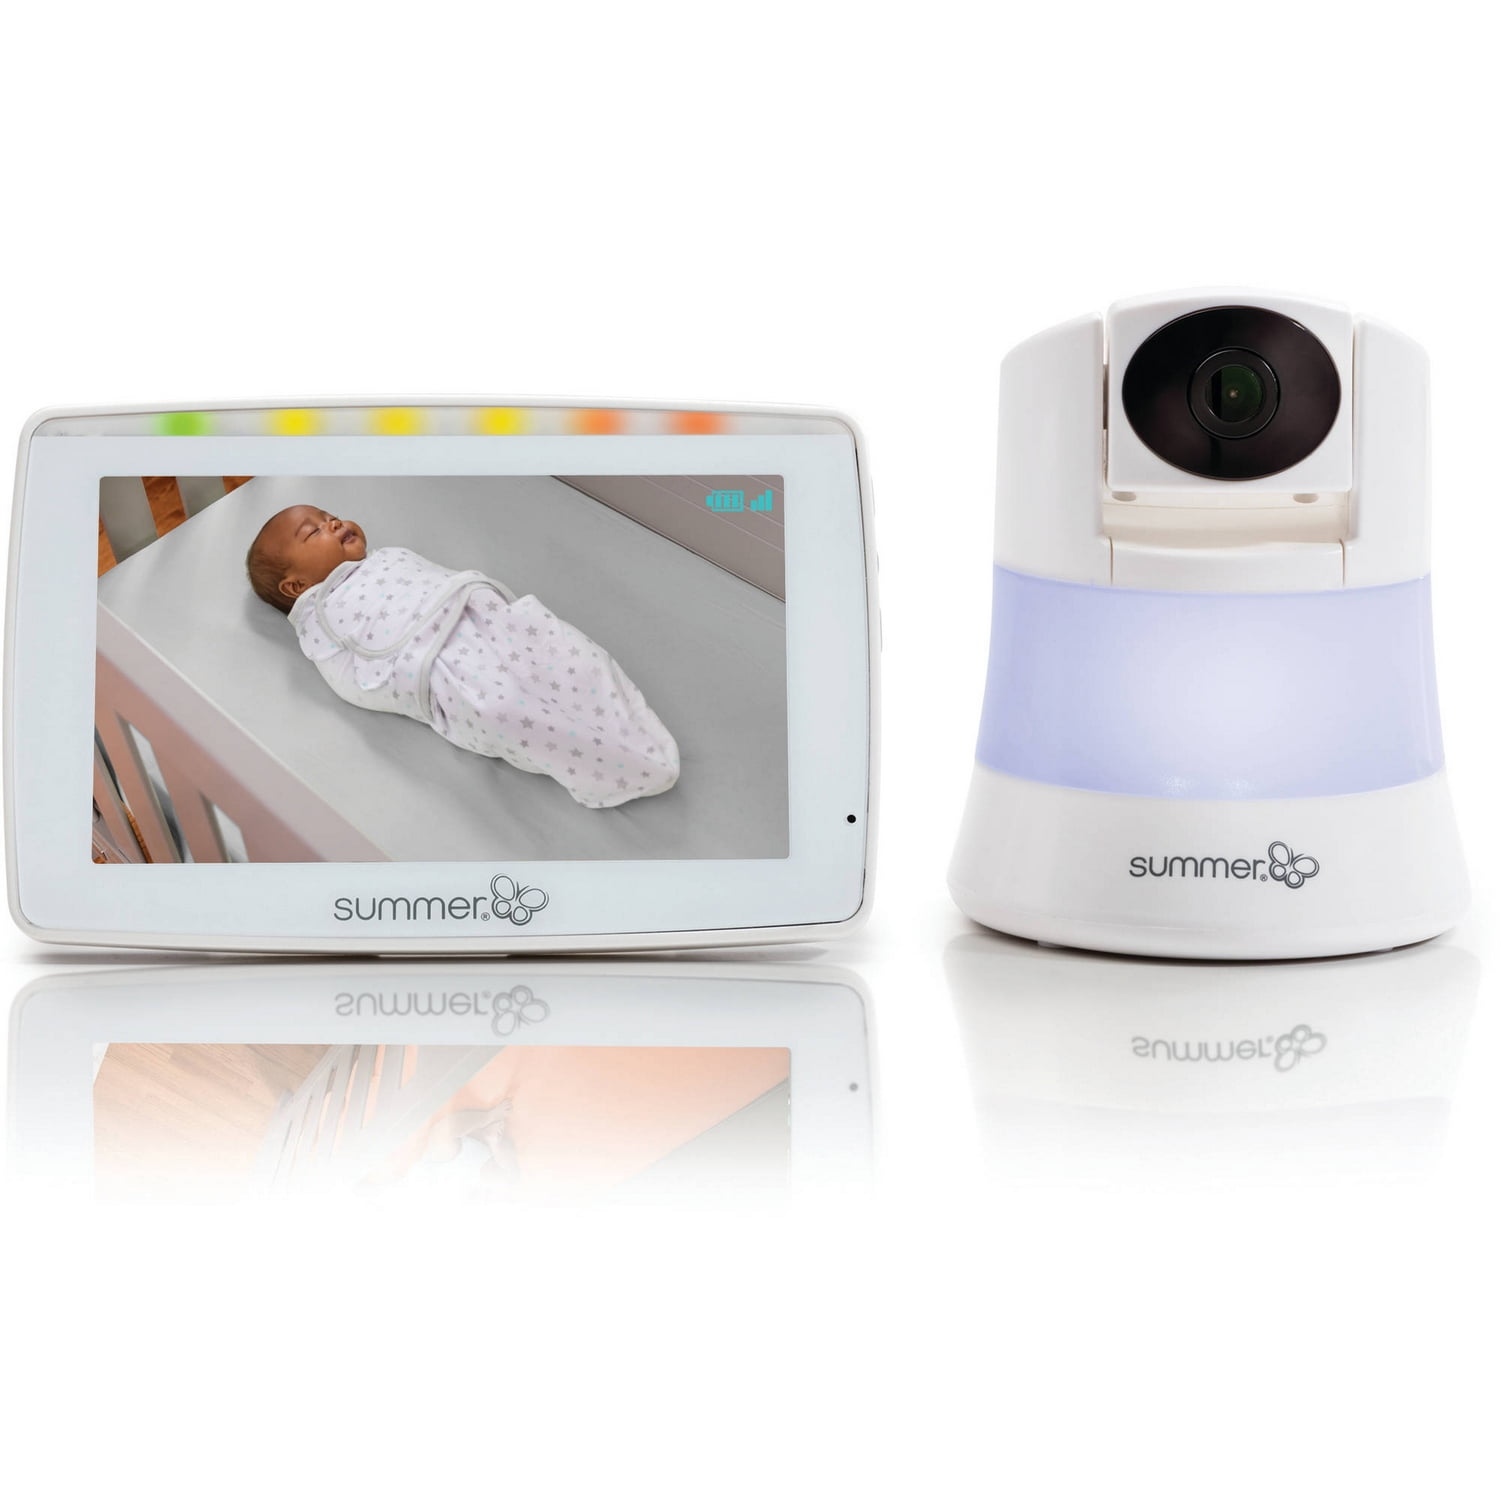 Summer In View Video Baby Monitor - Walmart.com